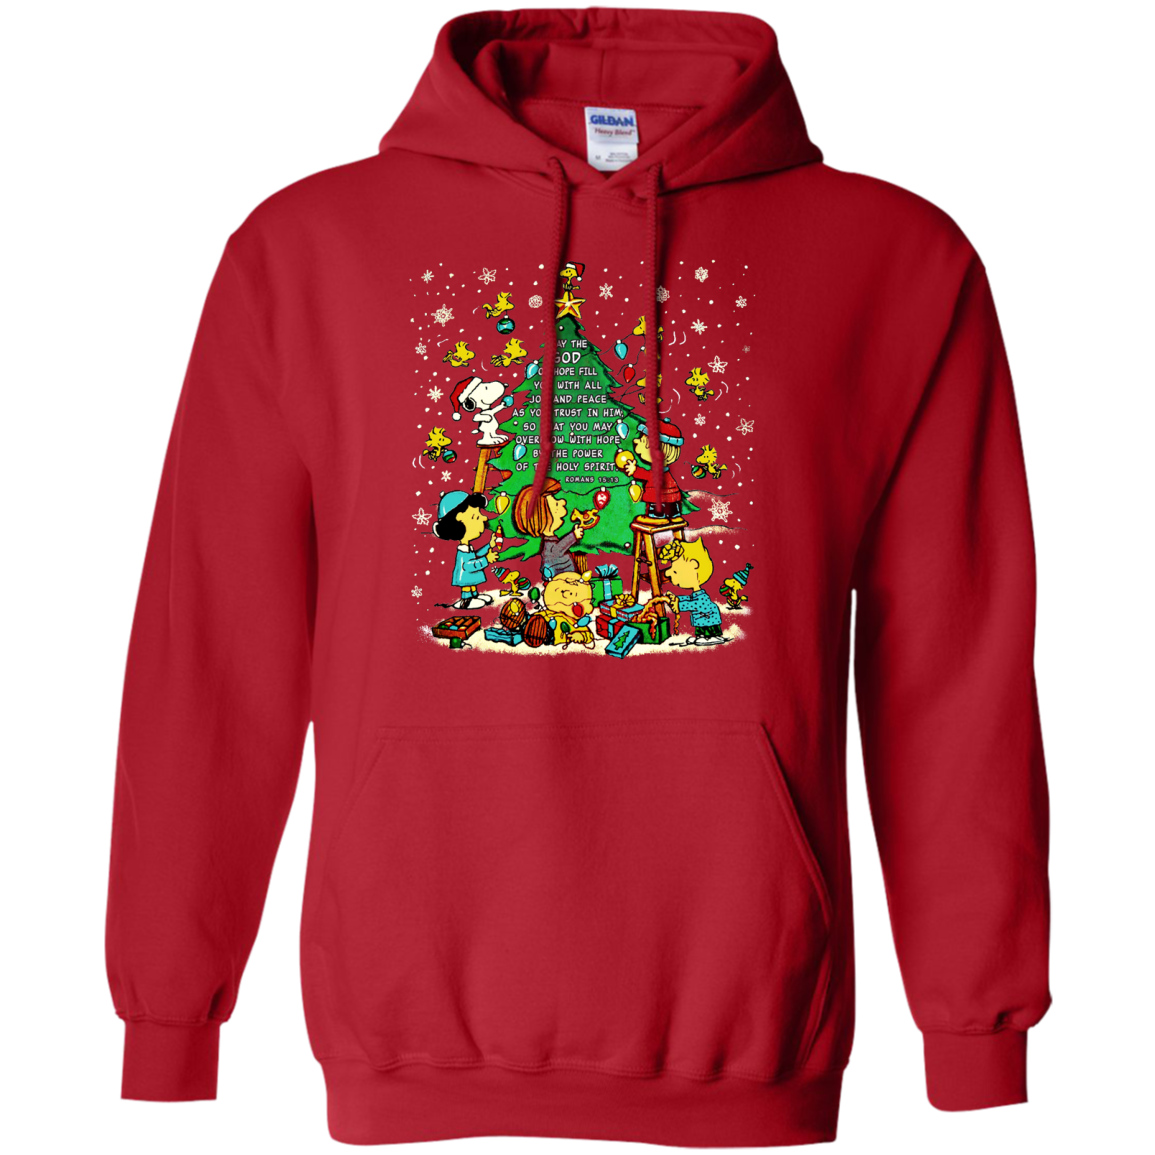 Peanuts Decorate the Christmas tree snoopy shirts